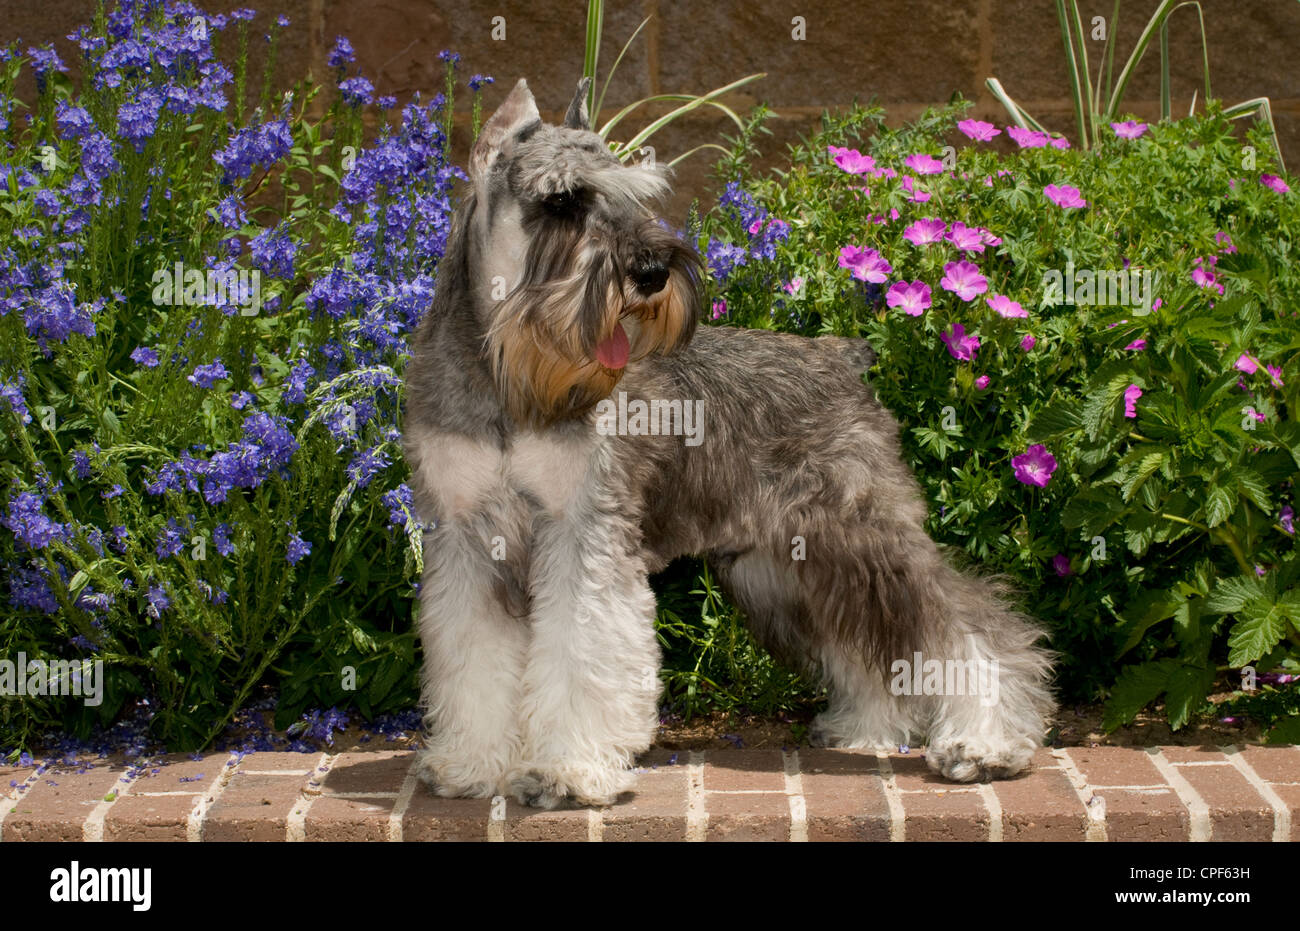 Miniature Schnauzer standing on wall in front of flowers Stock Photo